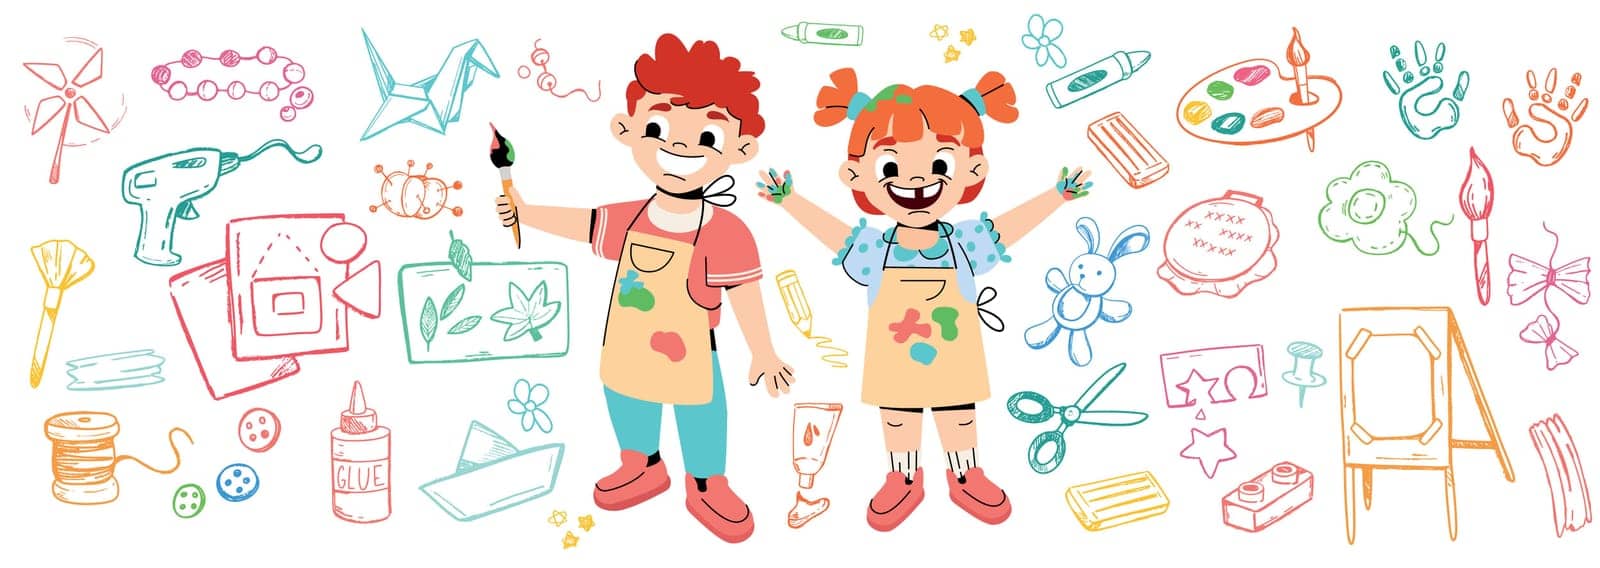 Funny cartoon children in kindergarten drawing with paints. Craft activities for kids Preschool happy girl and boy with art supplies icon collection. Daycare doodle. Child characters sewing, painting.